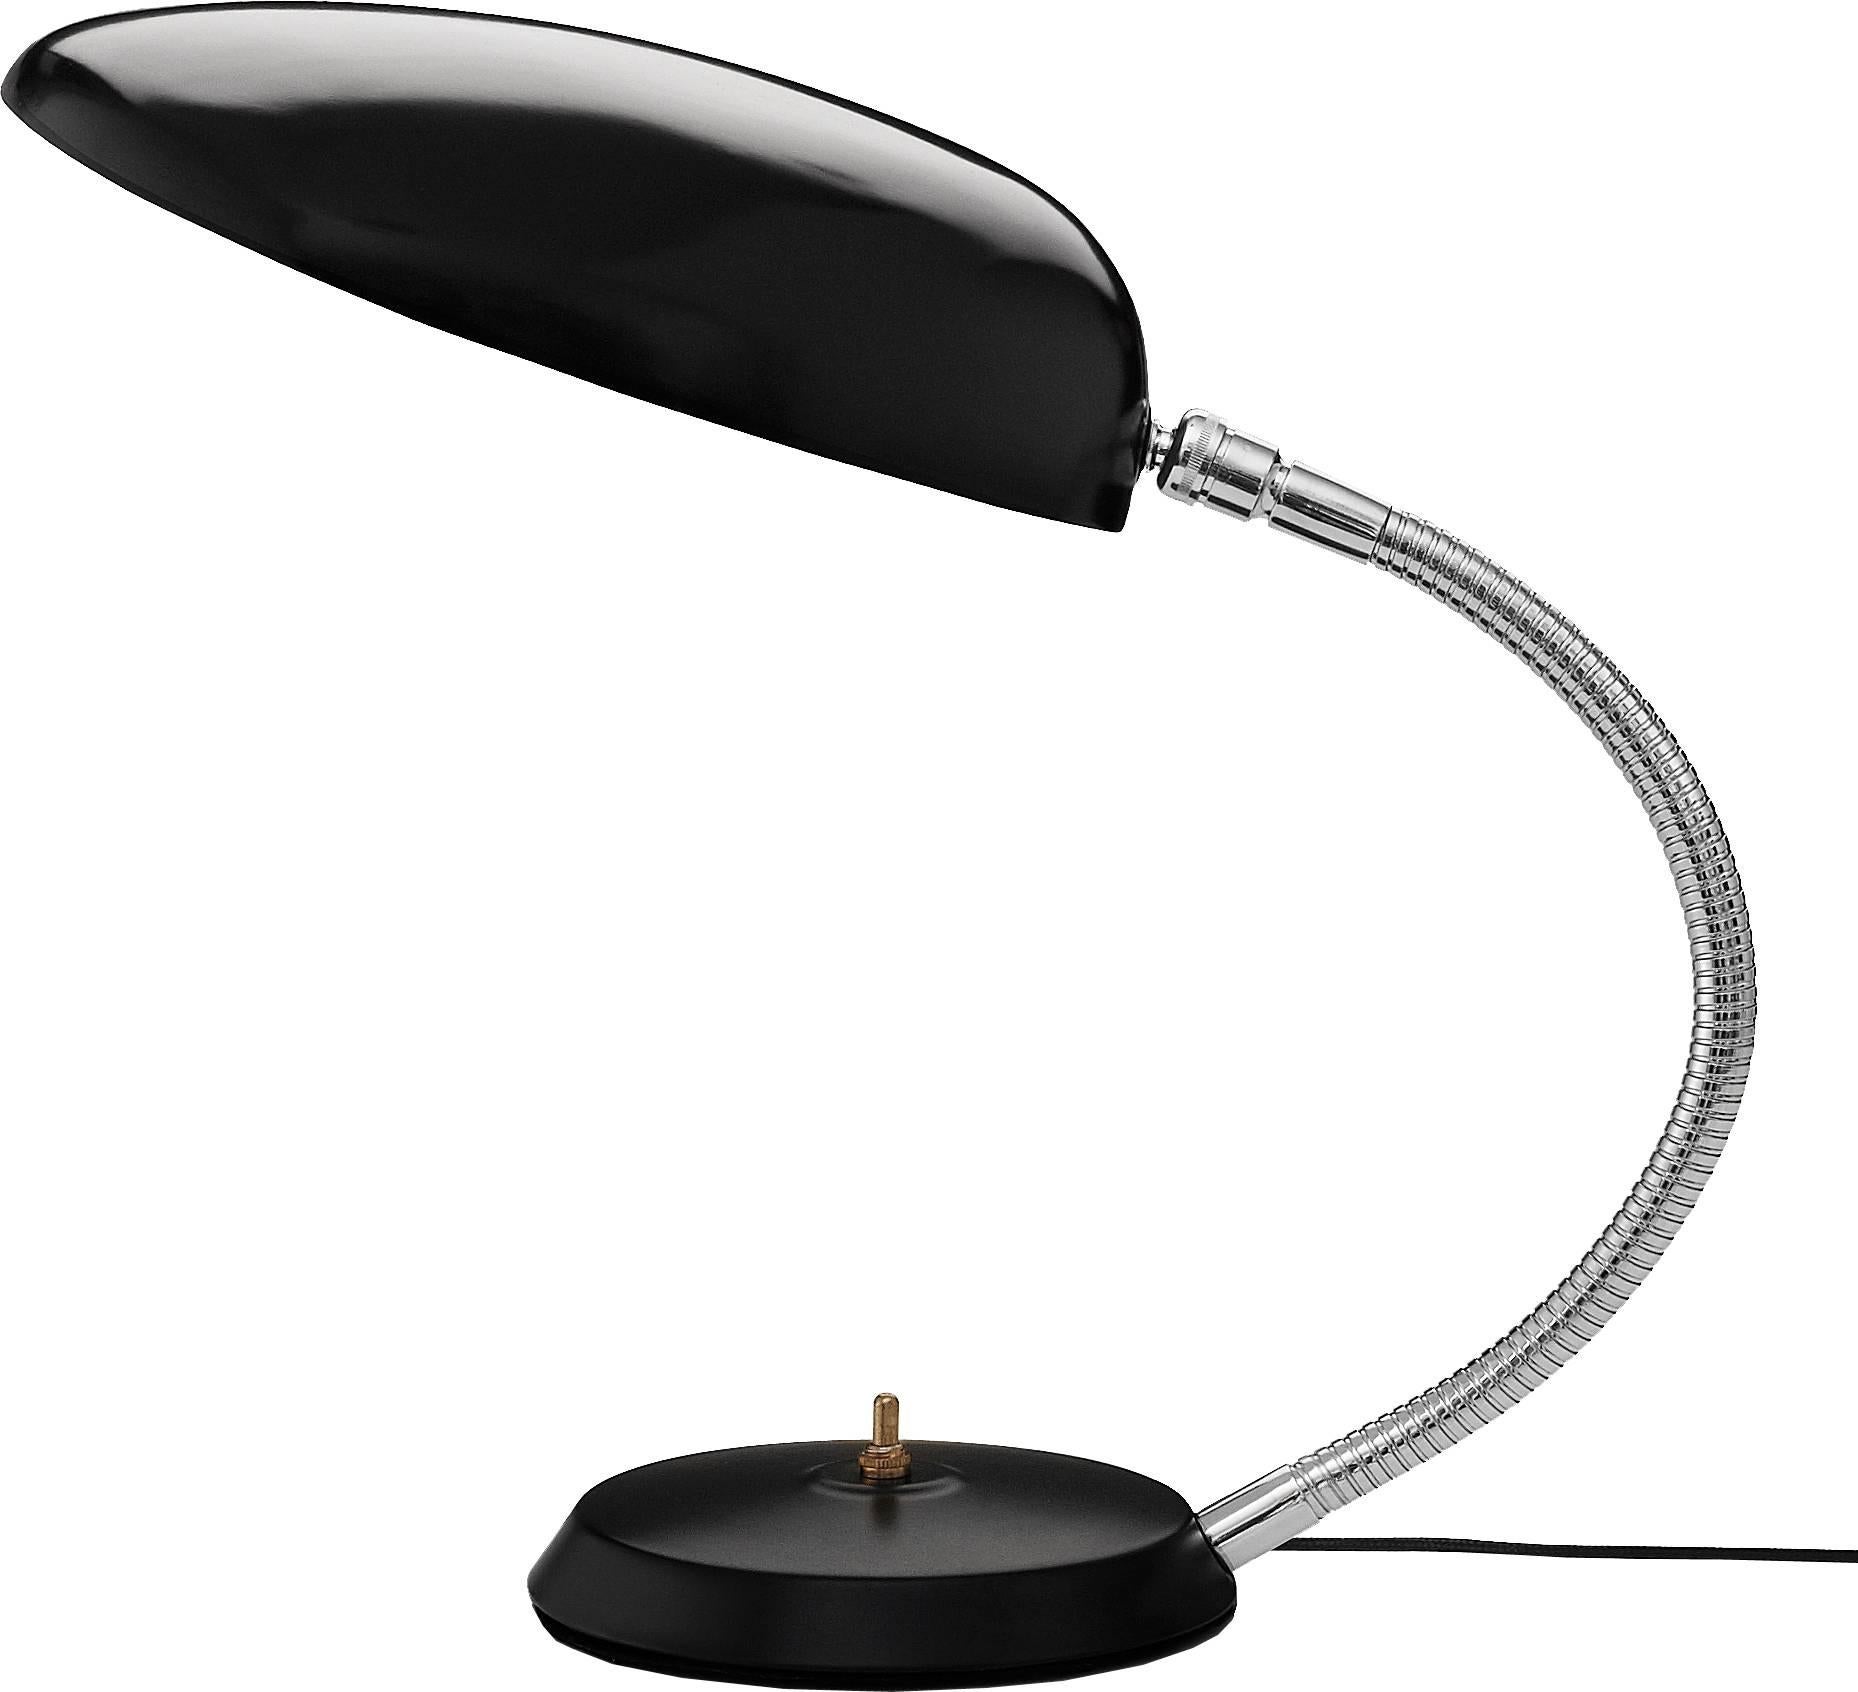 Greta Magnusson Grossman 'Cobra' table lamp in white. Designed in 1950 by Grossman, this is an authorized re-edition by GUBI of Denmark who meticulously reproduces her work with scrupulous attention to detail and materials that are faithful to the